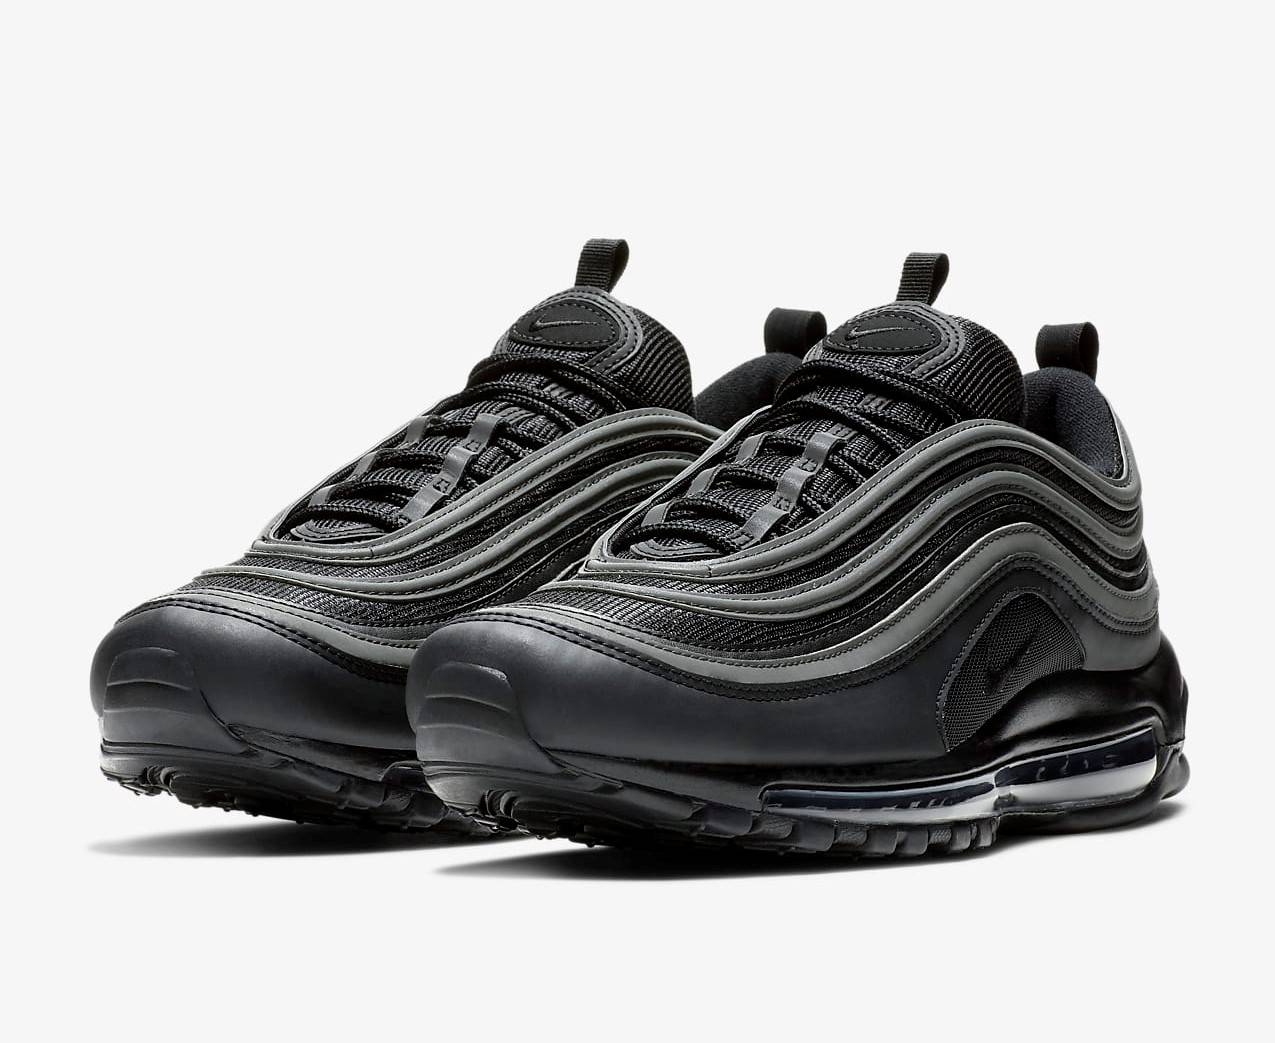 gomila nike air max 97 trainers in 